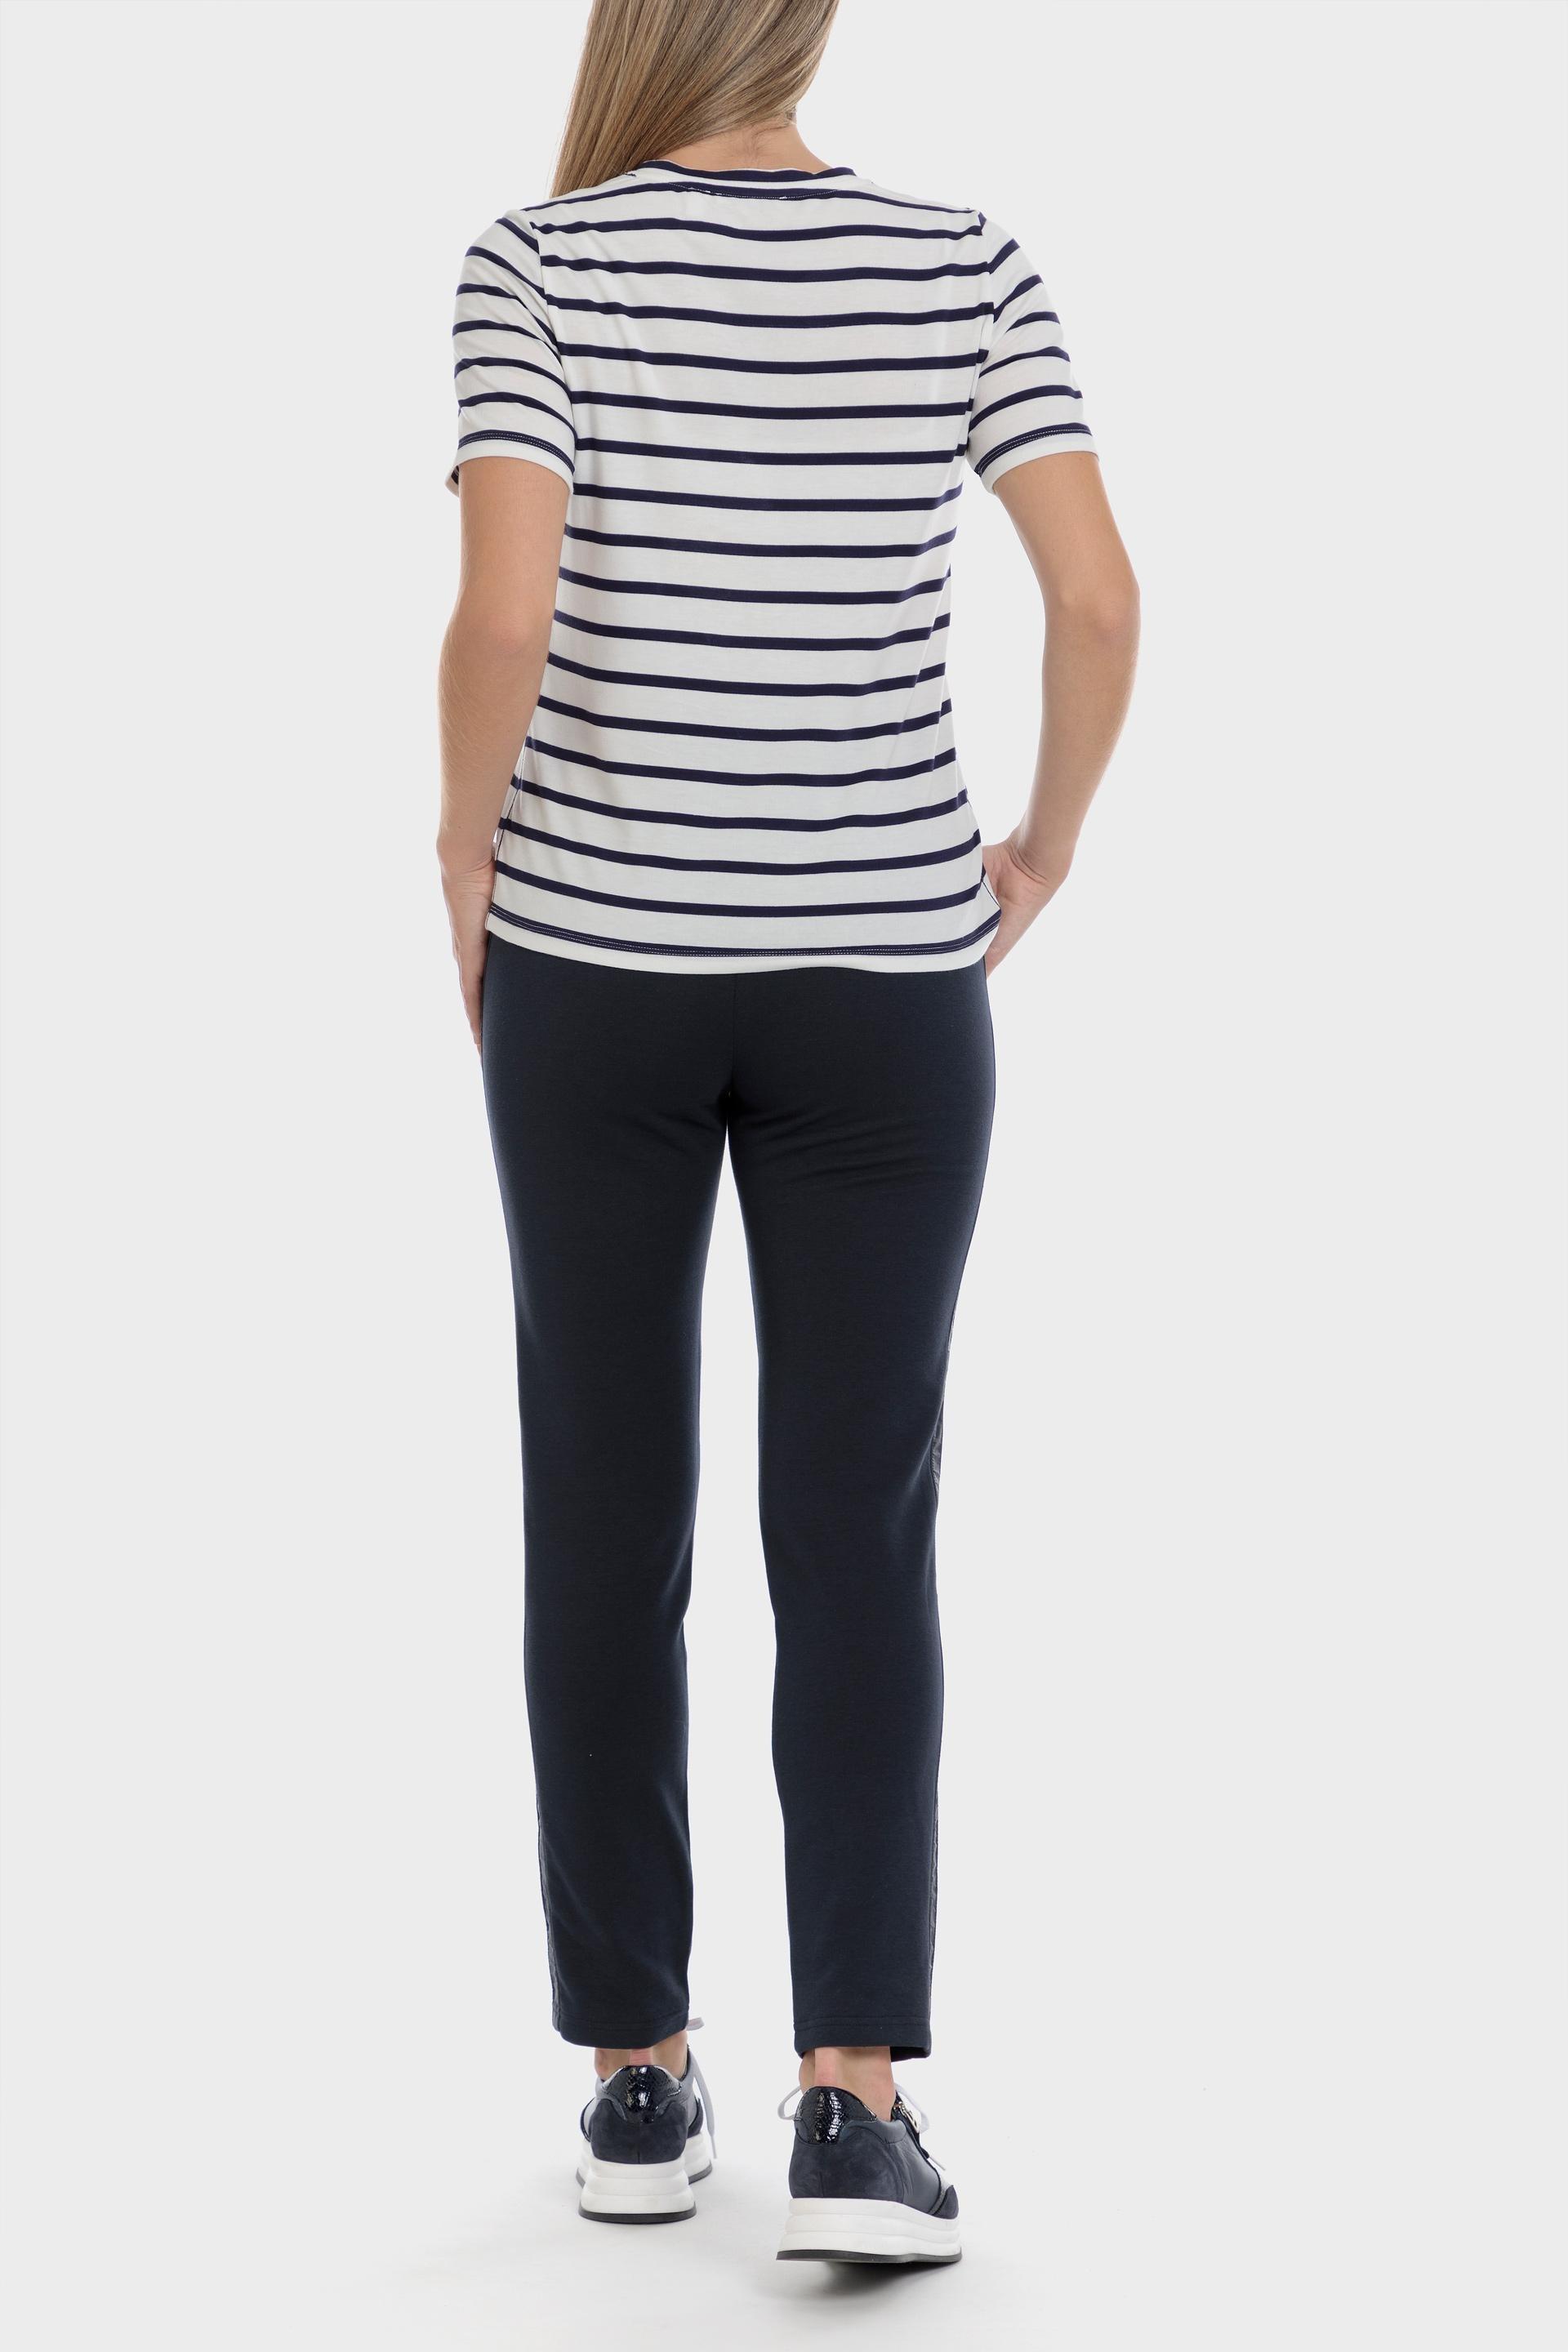 Punt Roma - Navy Side Stripe Trousers